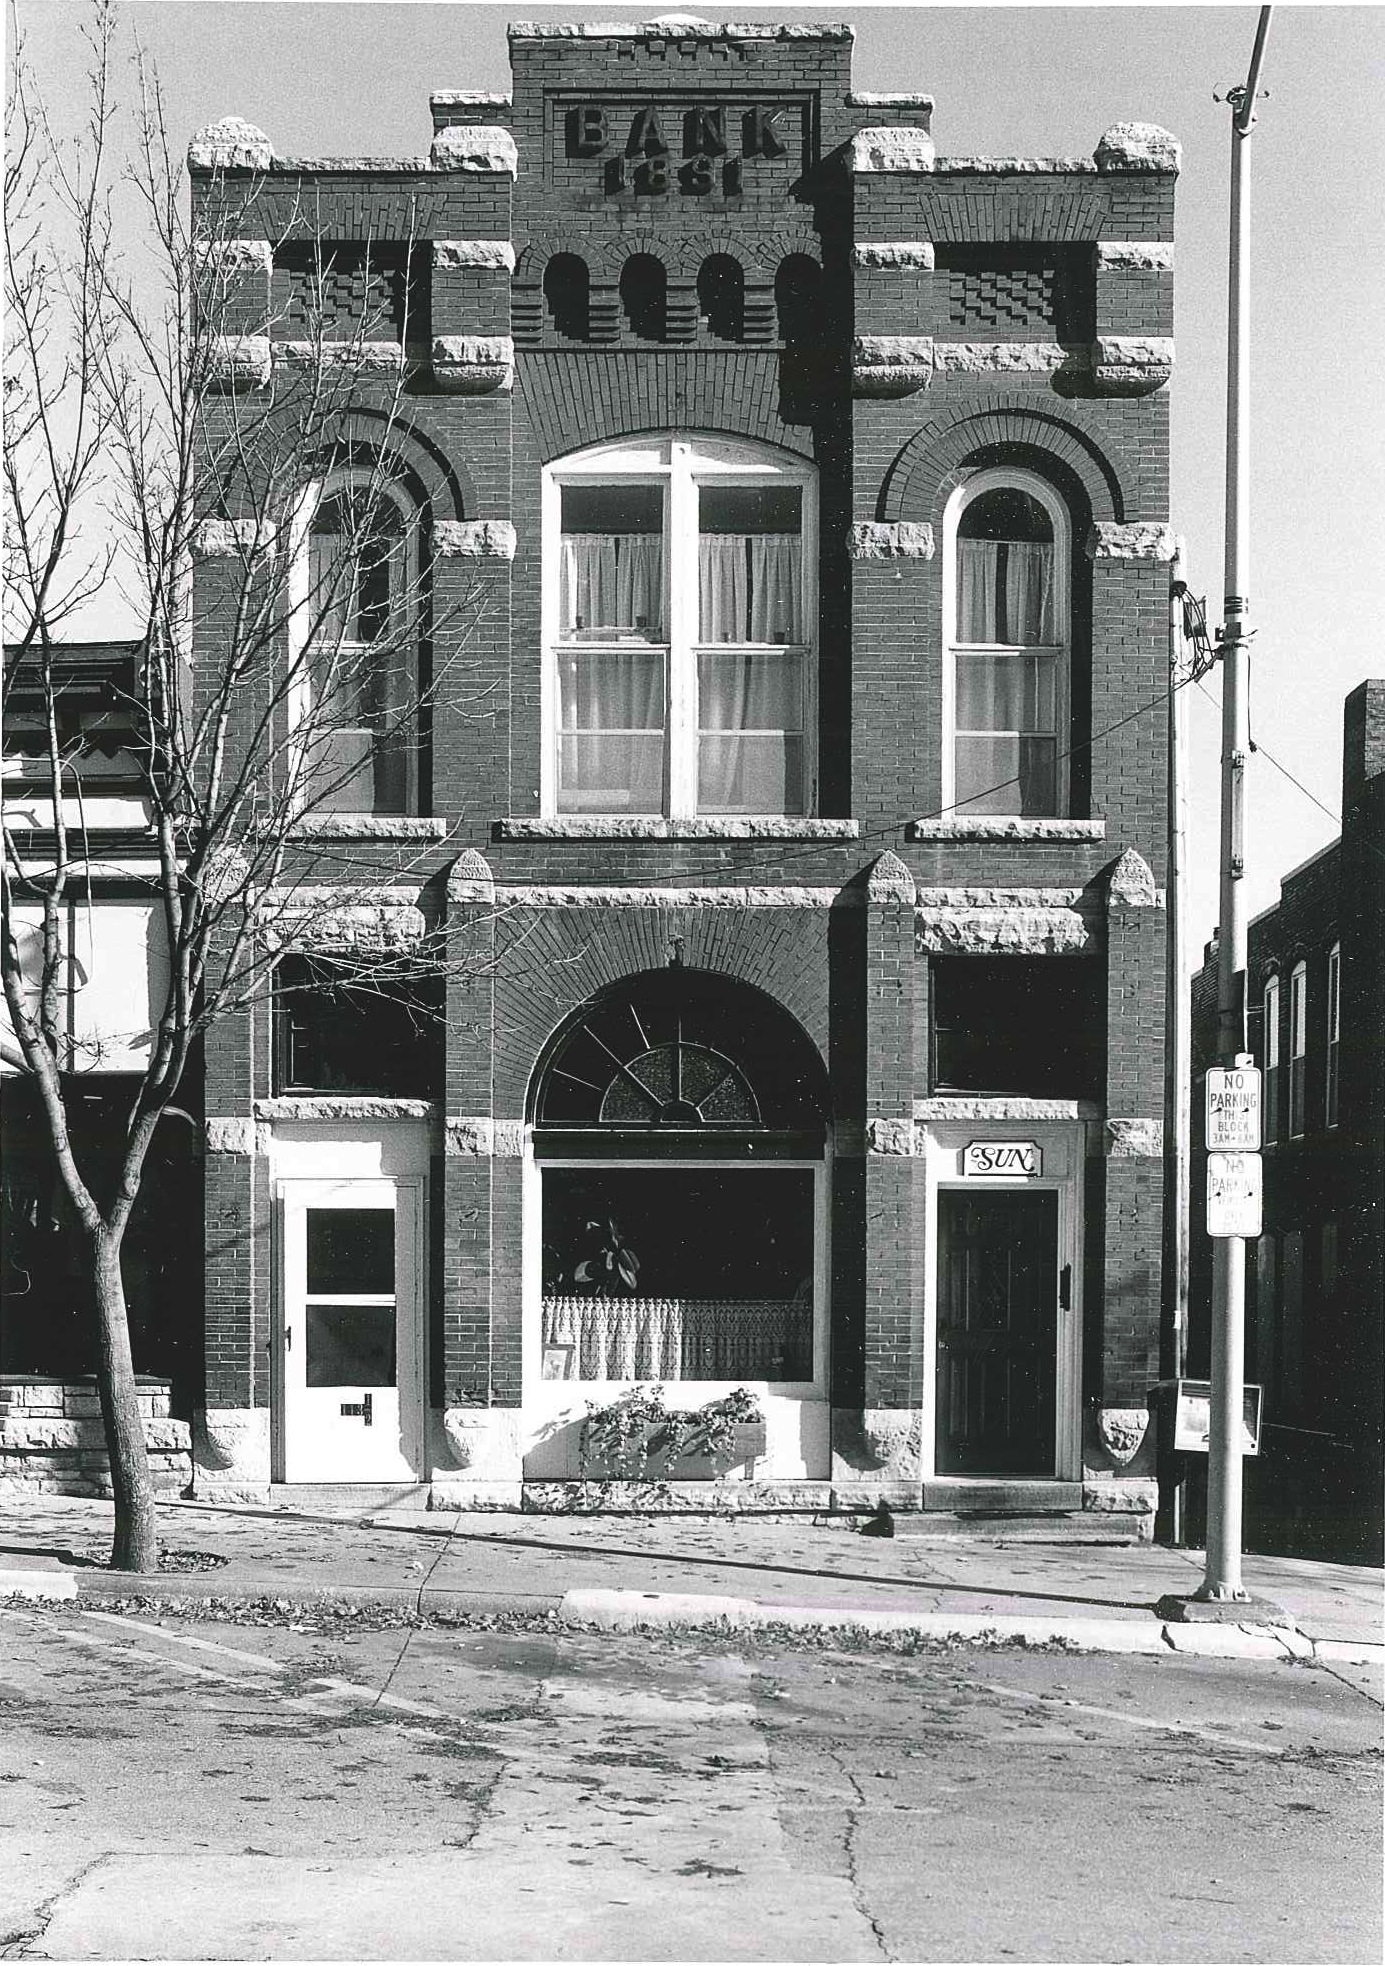 Photo of building at 113 First Street W. Photographed 1990 by Barbara Beving Long.